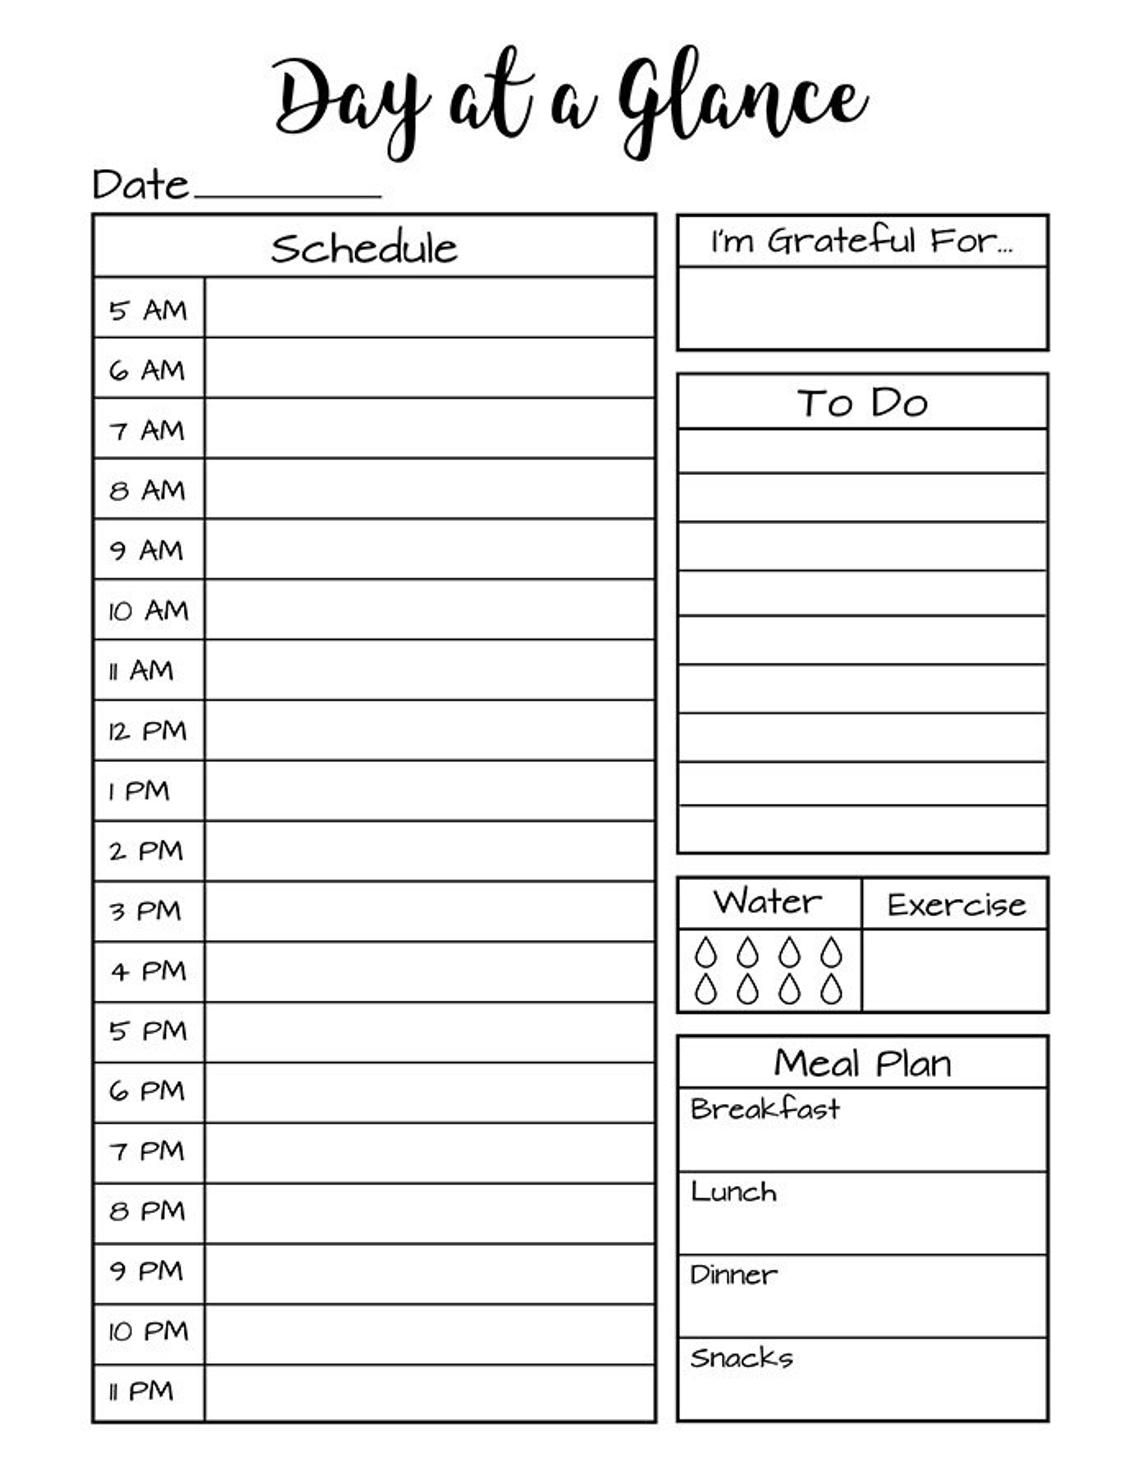 Month At A Glance Printable + Day At A Glance Bullet Journal within Month At A Glance Printable